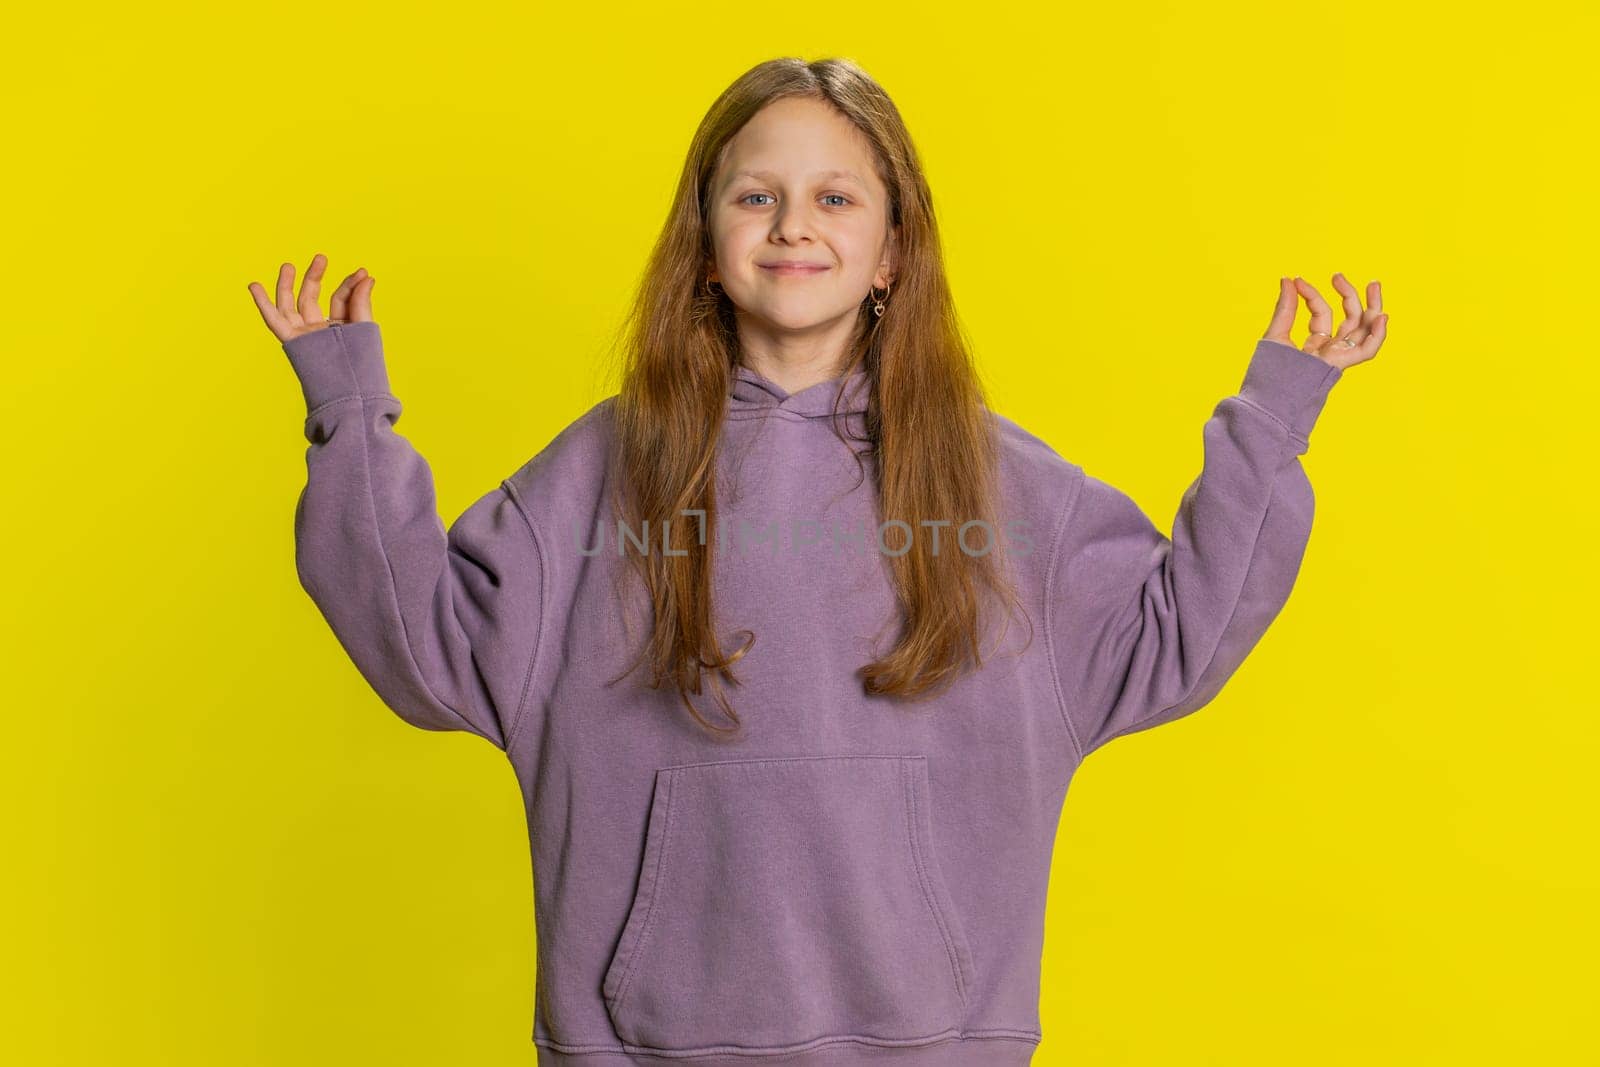 Keep calm down, relax rest. Concentrated happy smiling preteen child girl kid meditating breathes deeply with mudra yoga gesture eyes closed peaceful mind taking a break. Children on yellow background